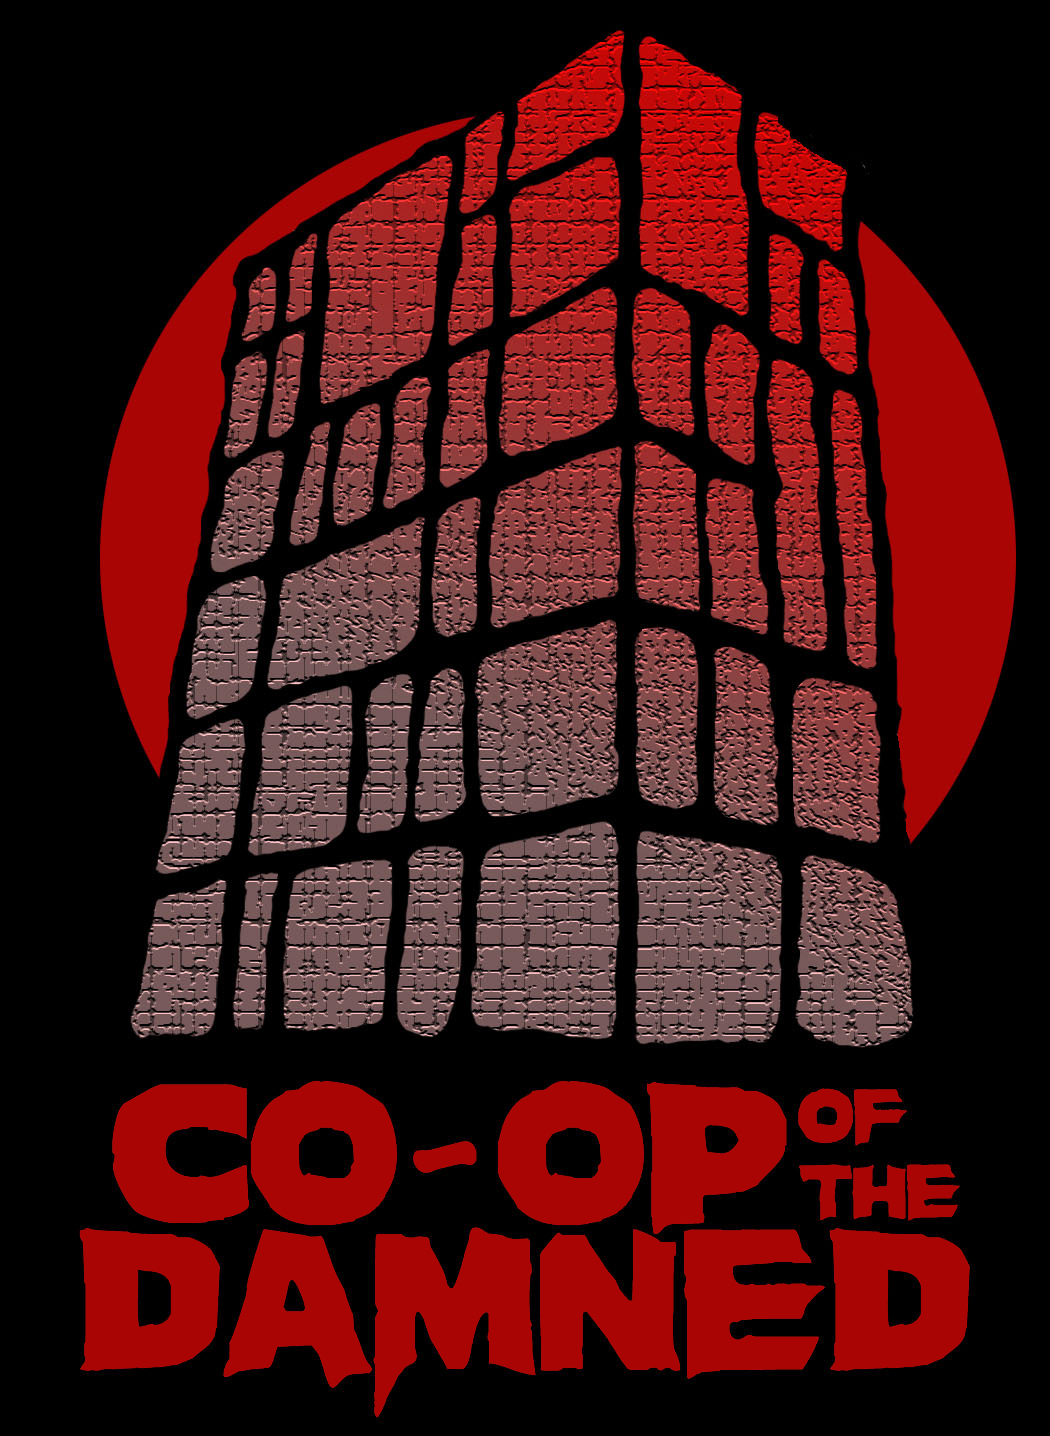 Co-op of the Damned